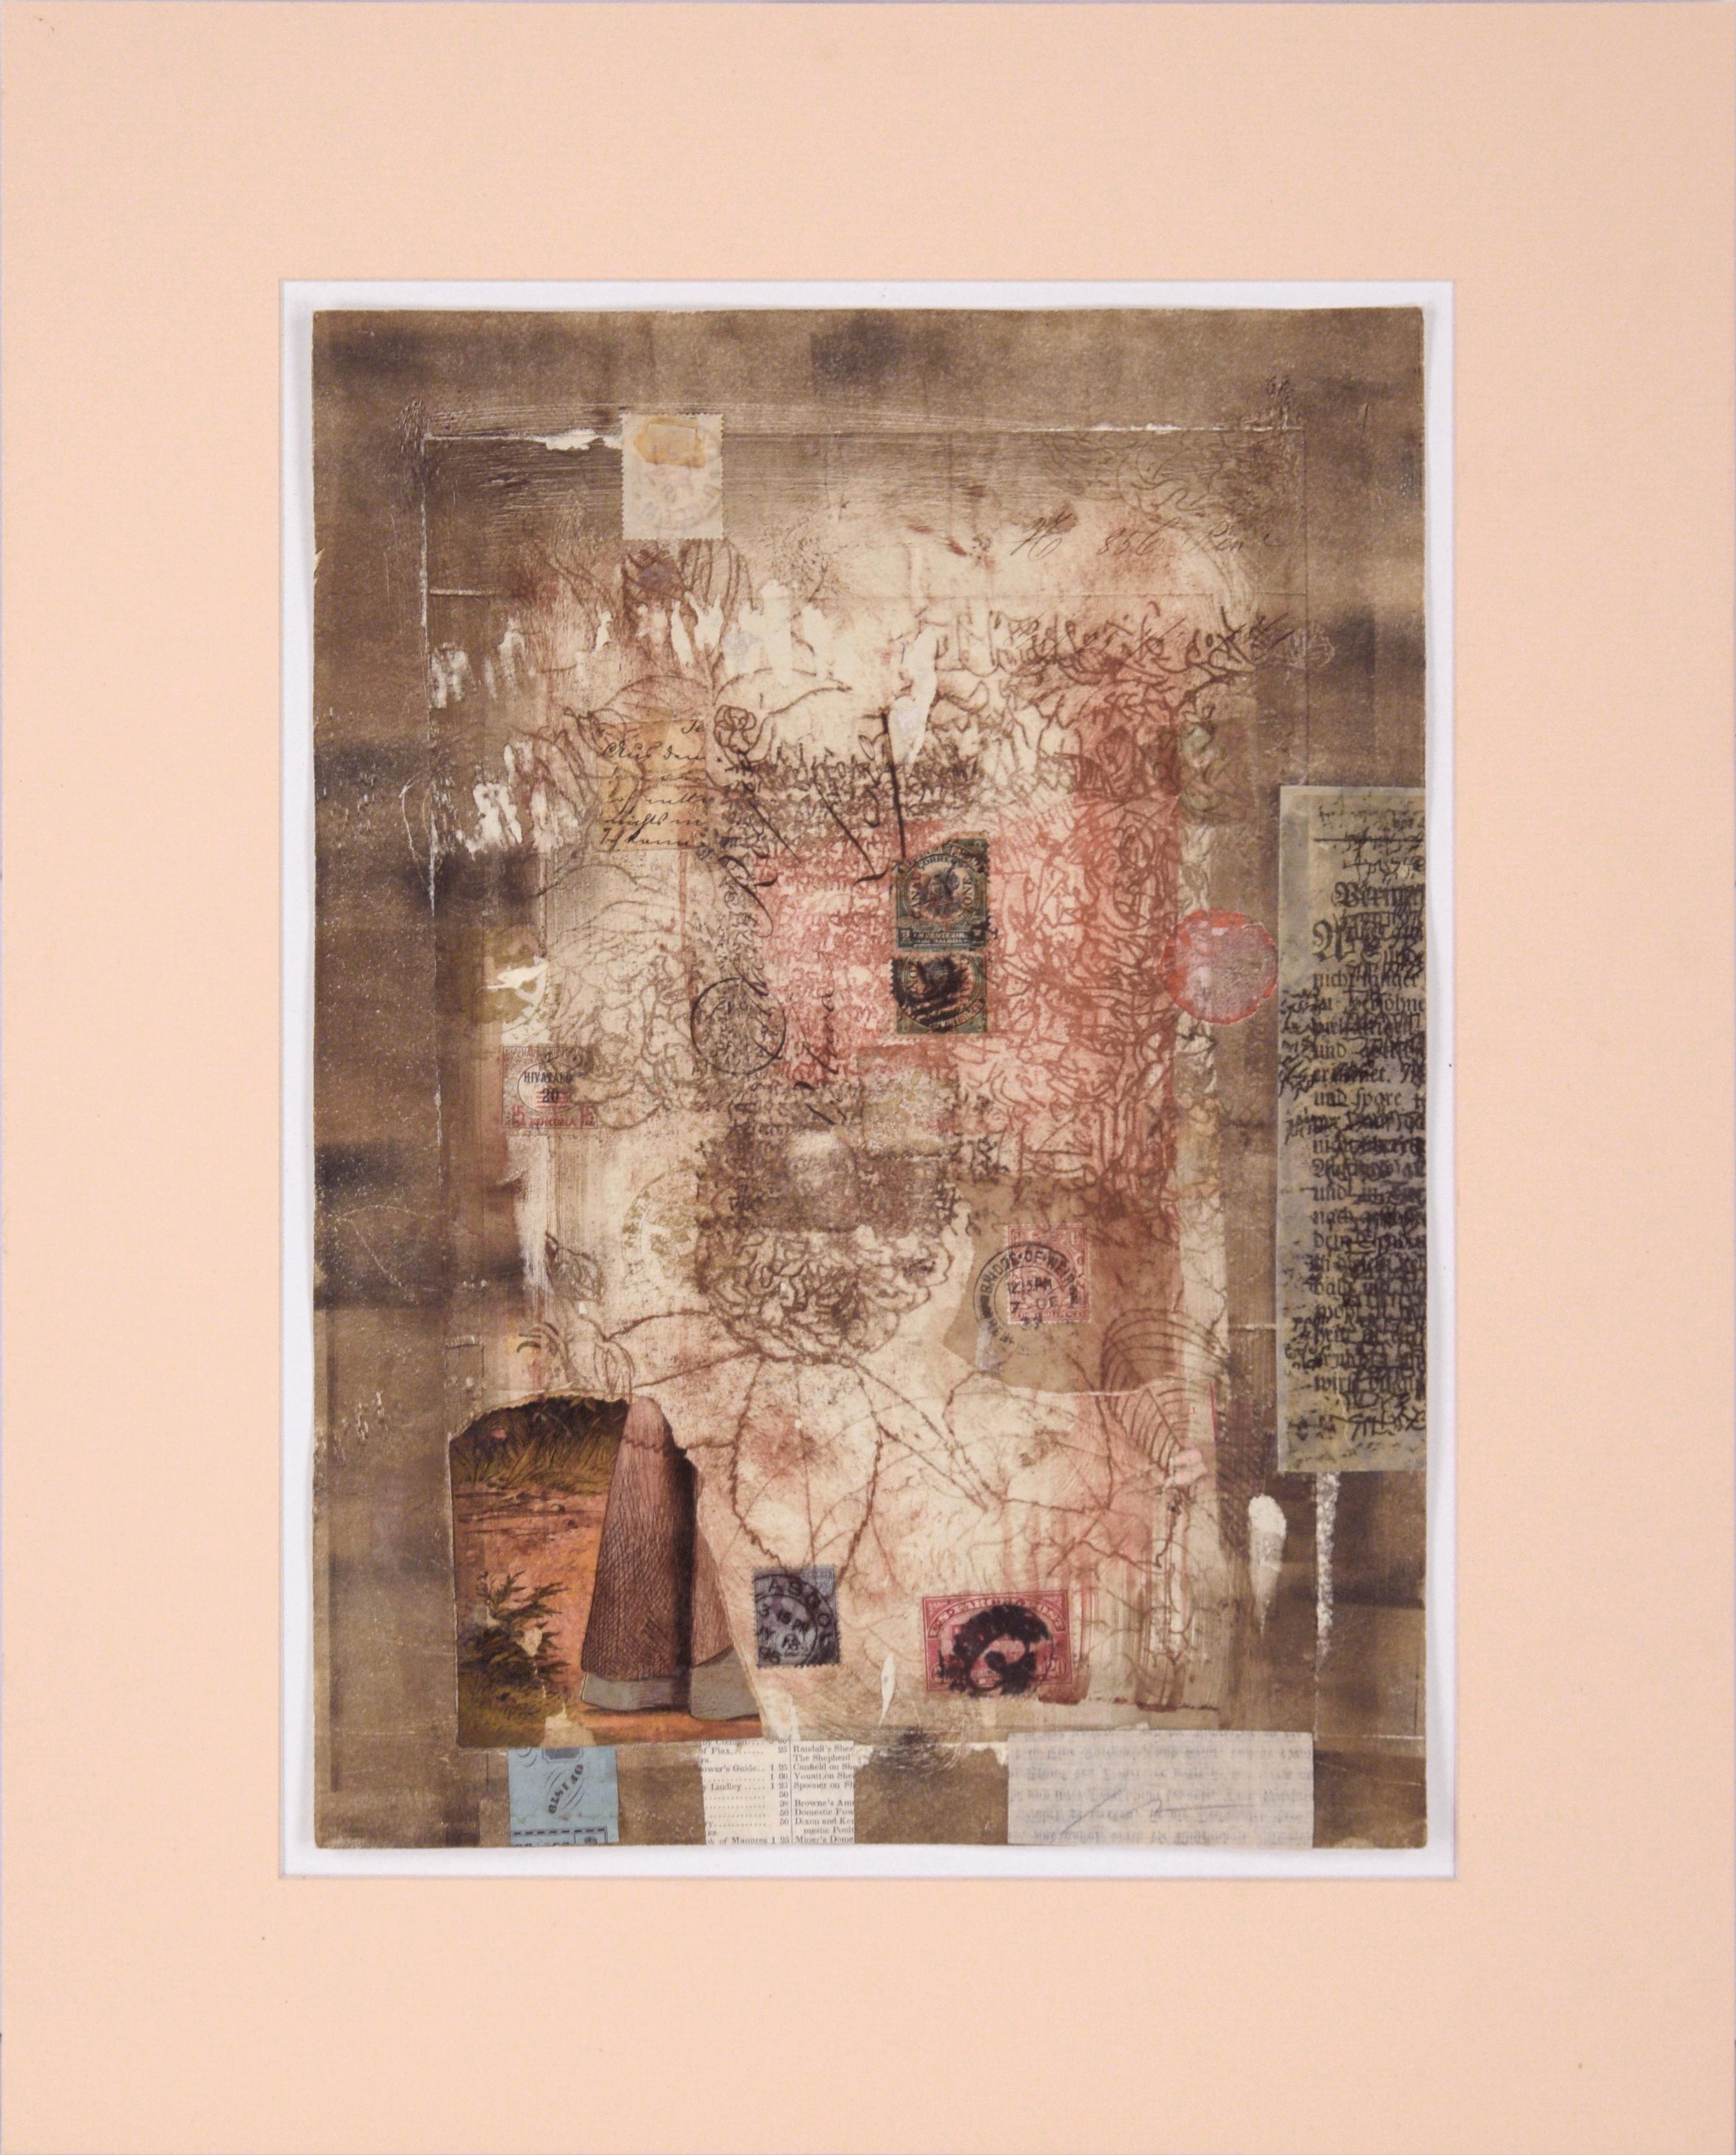 Michael Pauker  Abstract Painting - Hivatalo - Chine Colle Monoprint with Collage